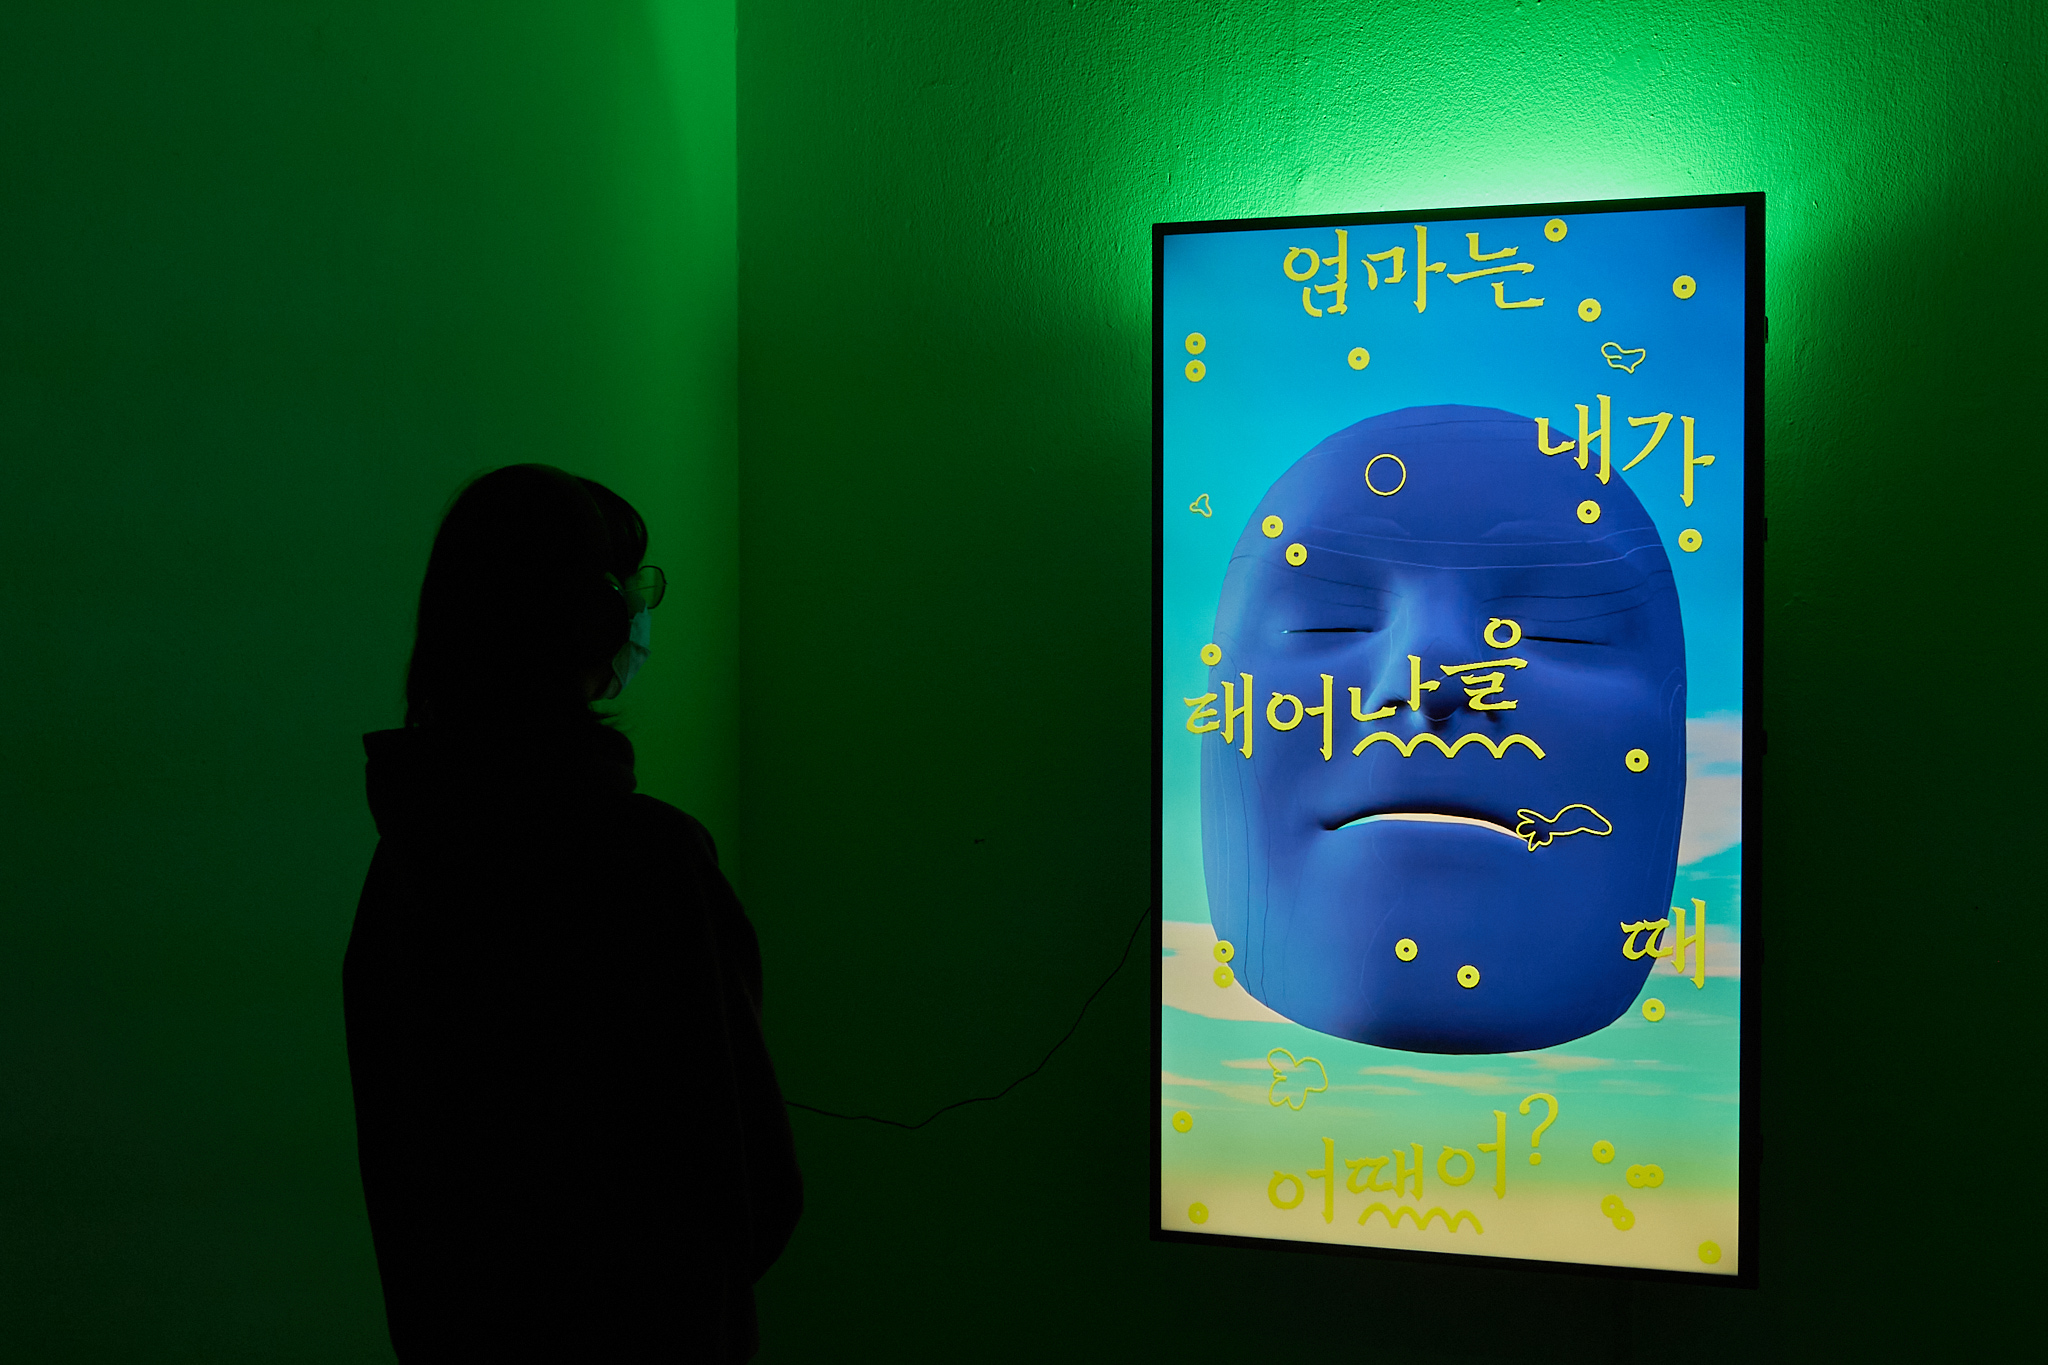 Haejung Jung Solo Exhibition: Sea Squirt and I